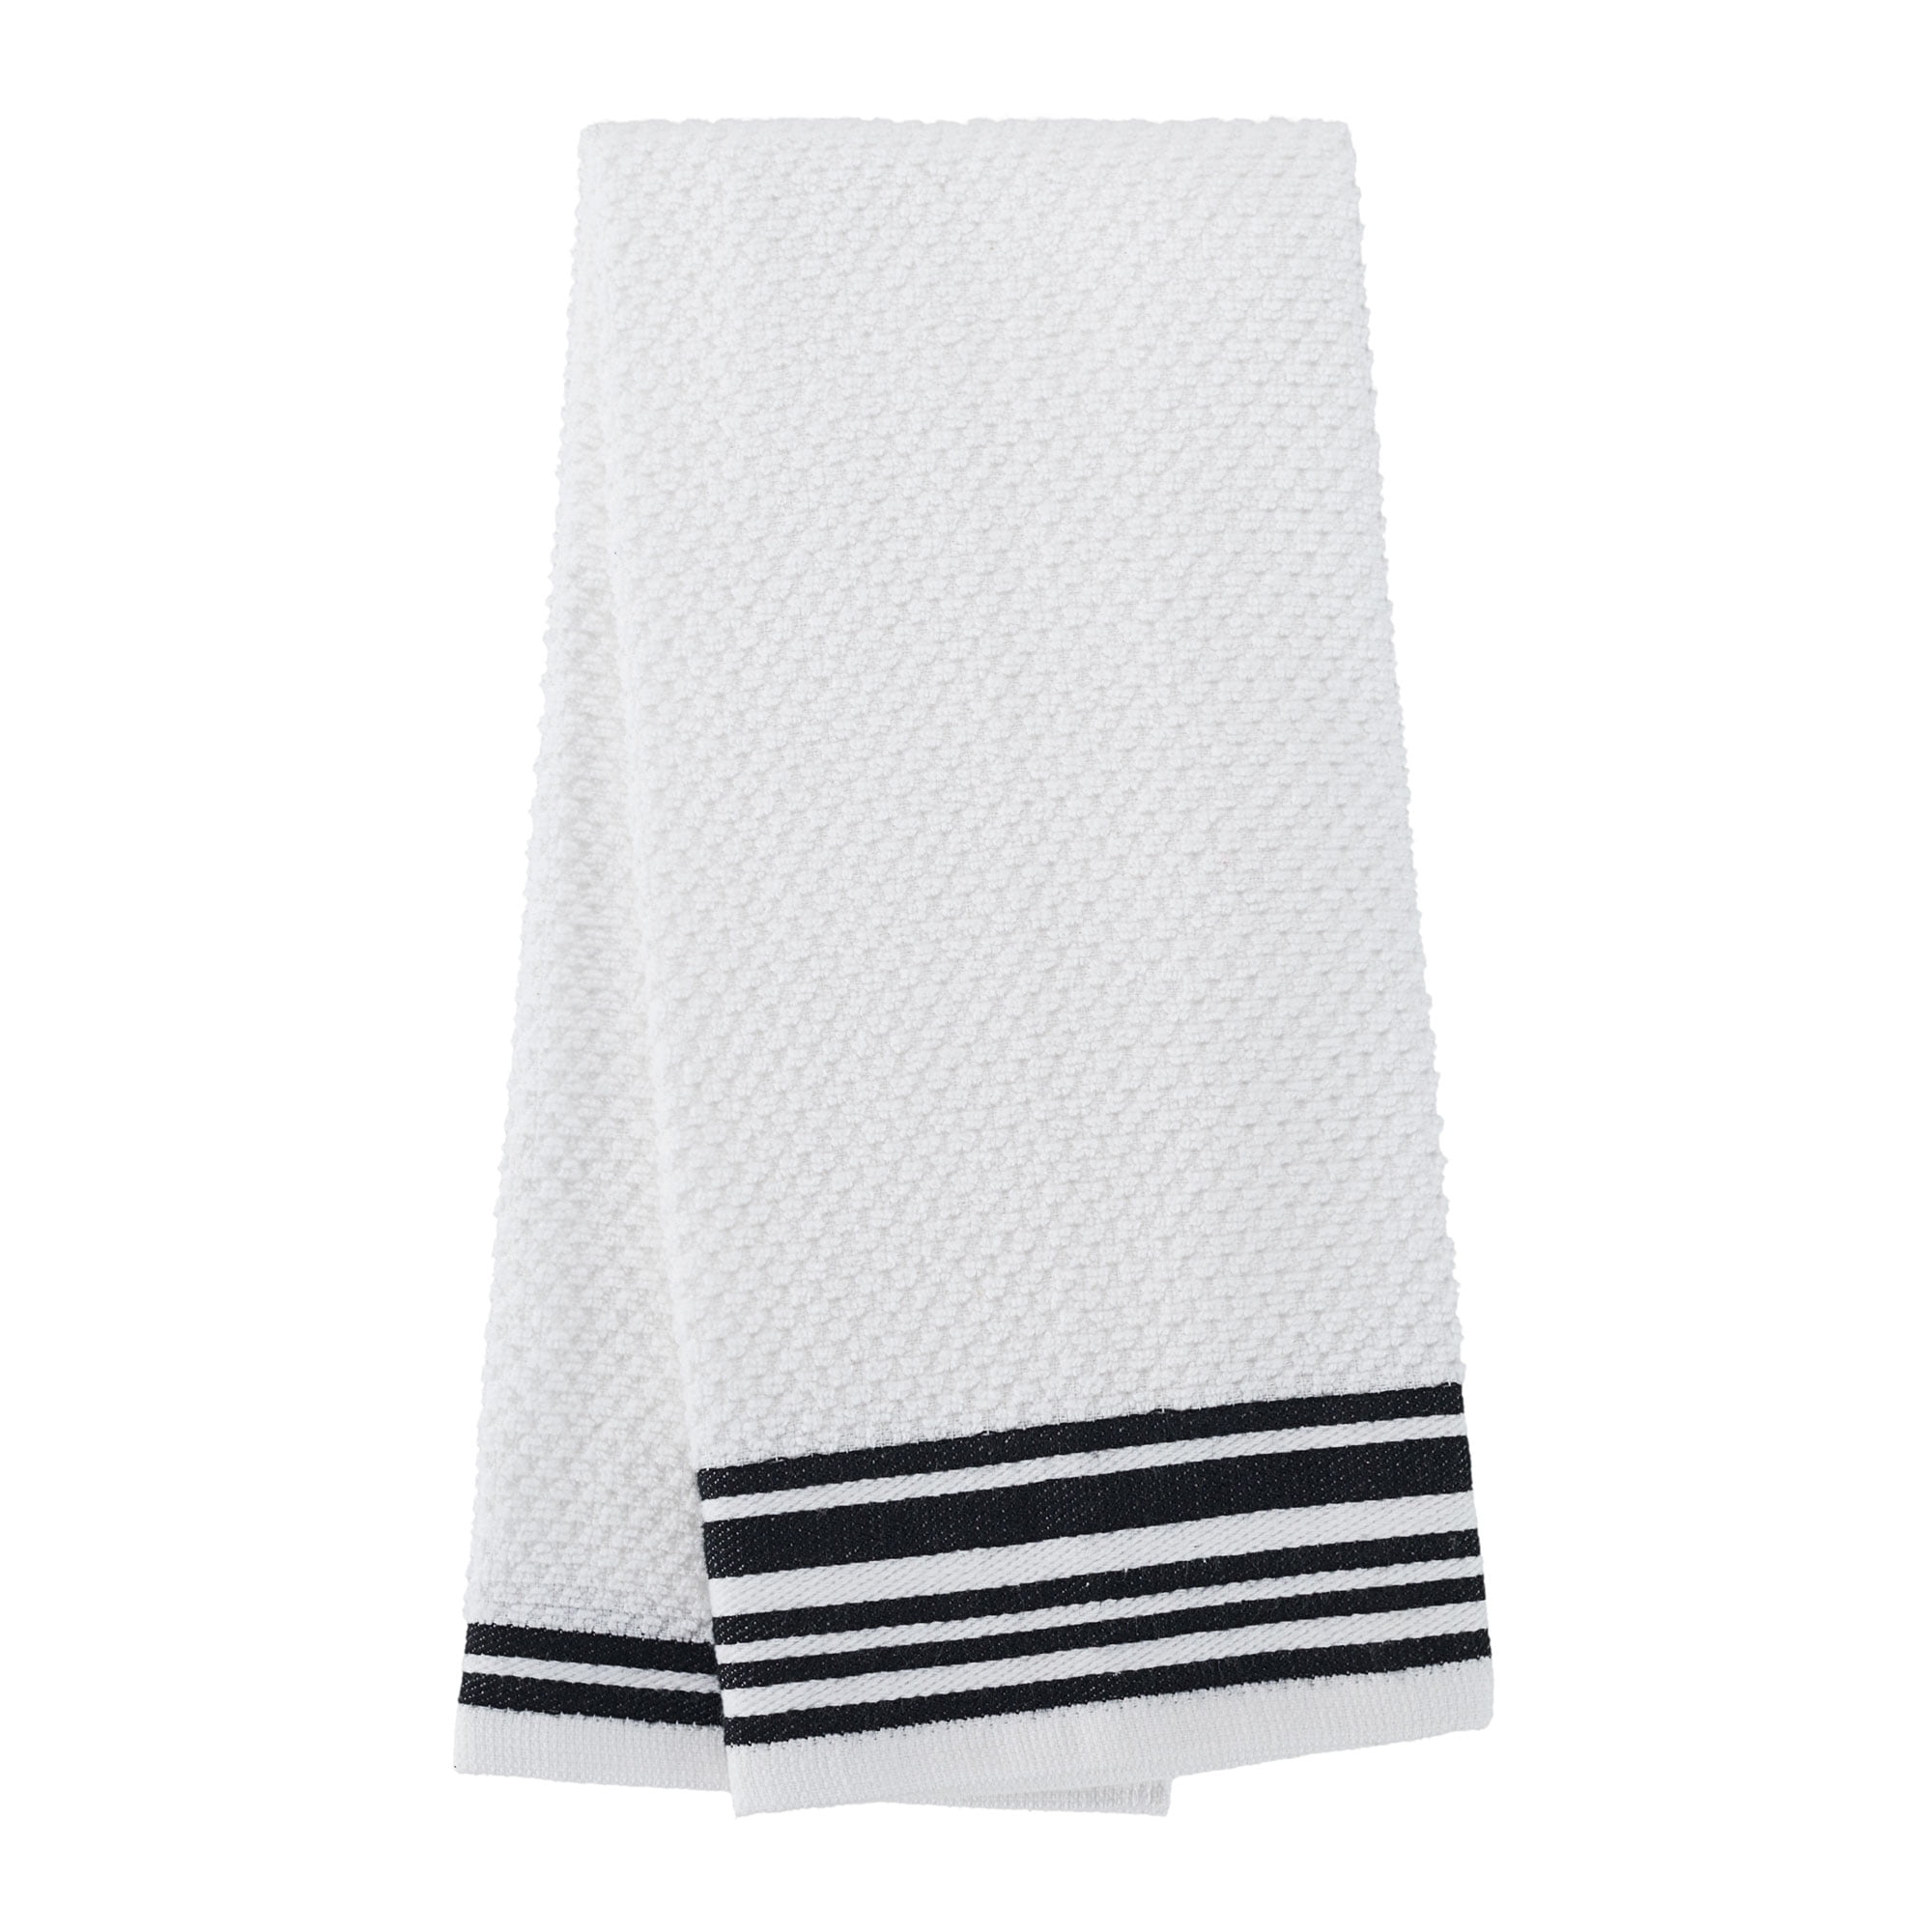 Mellow Buff 100% Cotton Terry Dish Towels, 4 Pack Checks, 16 x26 Inches,  Super Soft and Absorbent Kitchen Towels, Perfect for Kitchen Cleaning and